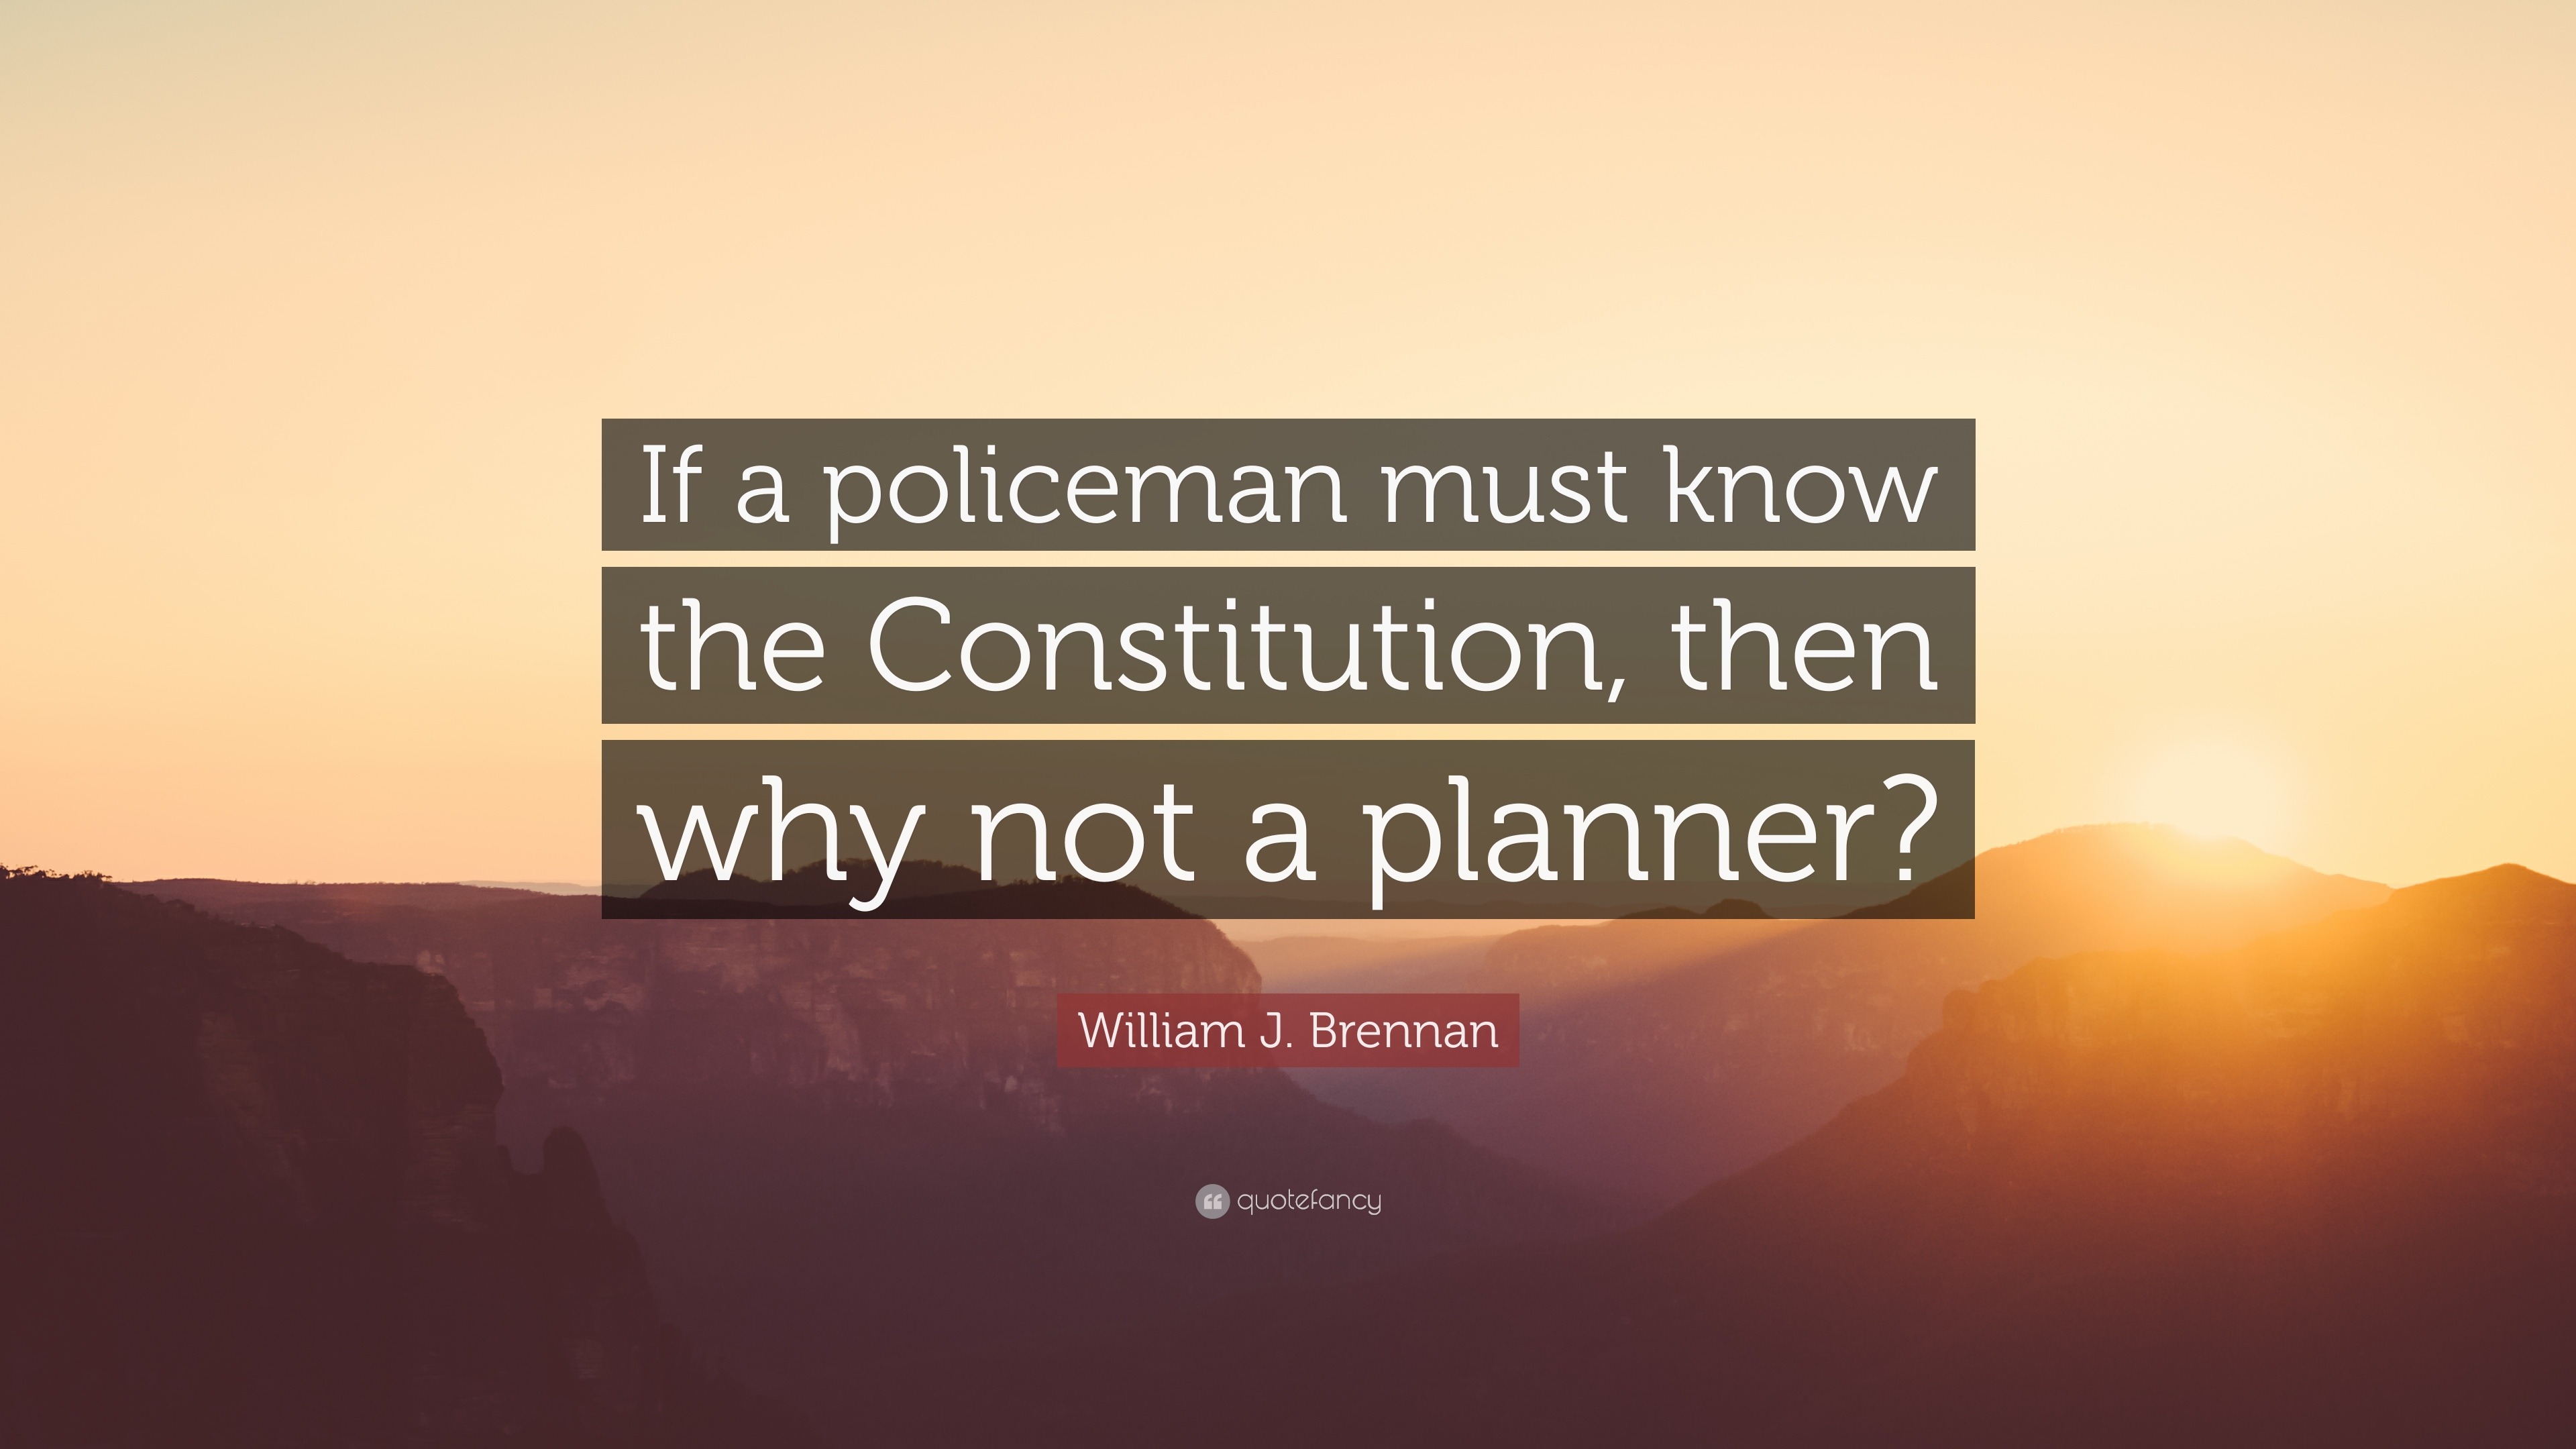 William J Brennan Quote “if A Policeman Must Know The Constitution Then Why Not A Planner” 0131